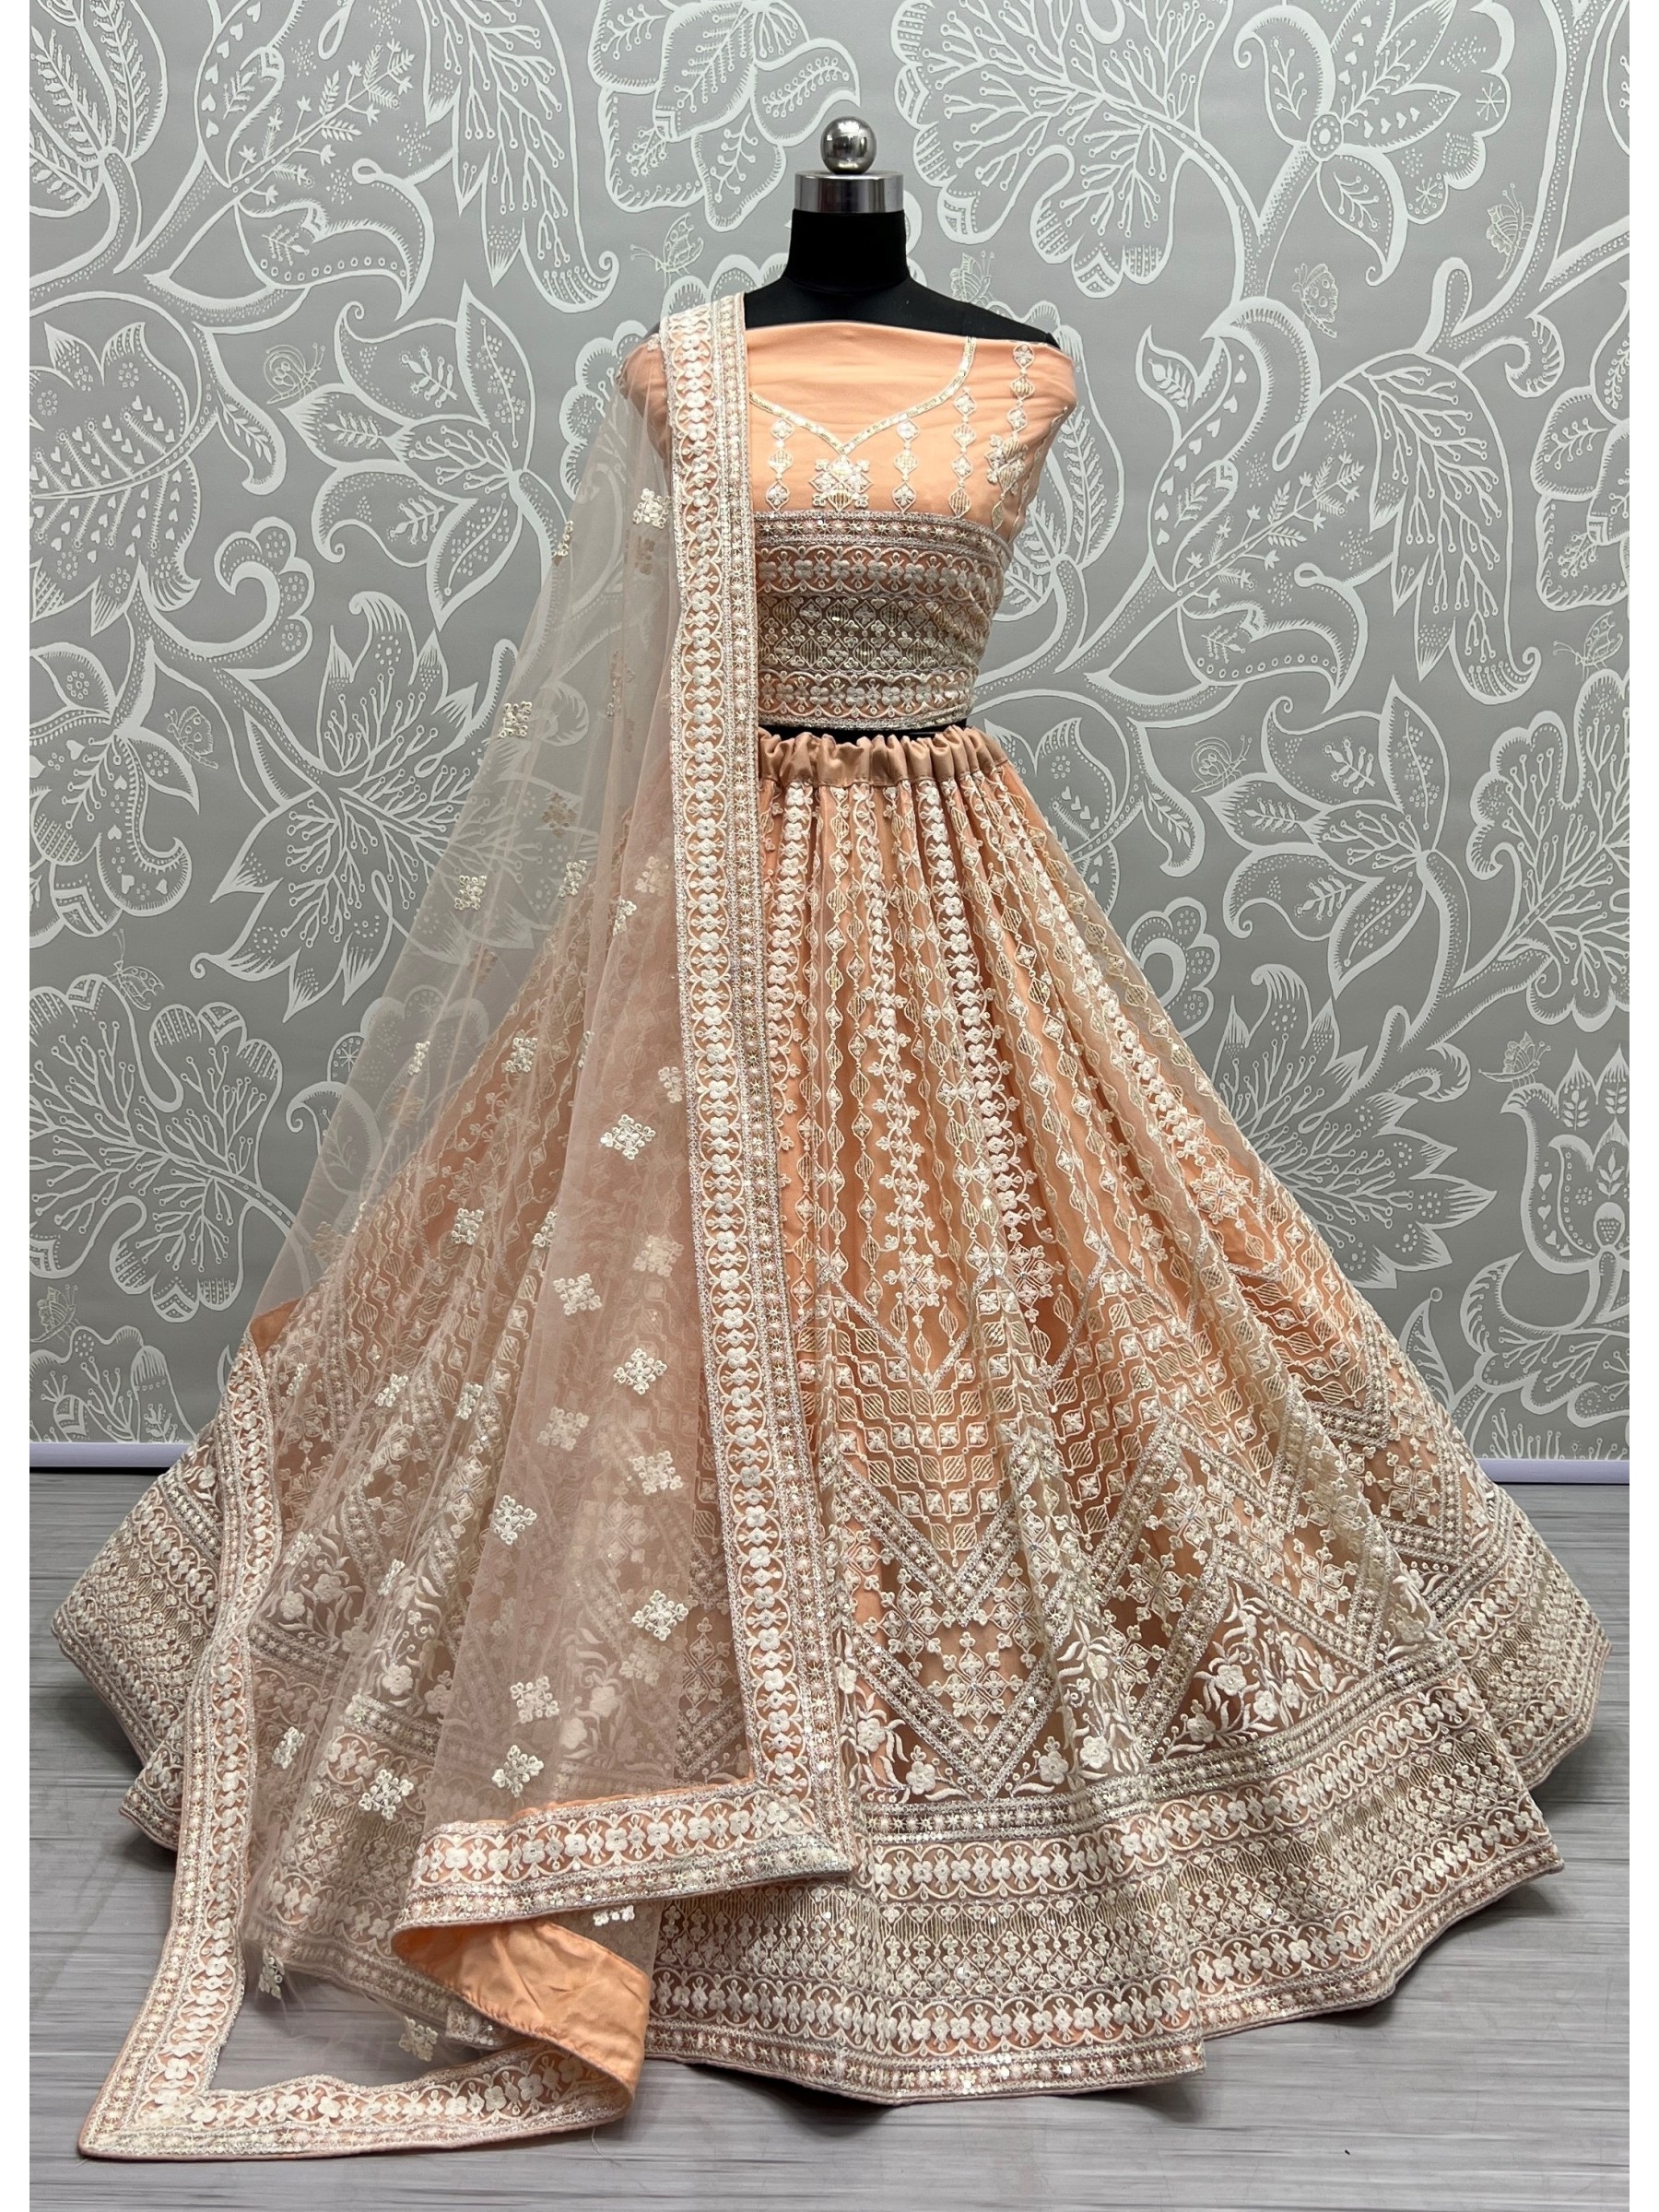 Soft Premium Net Wedding Wear Lehenga In Peach Color  With Embroidery Work